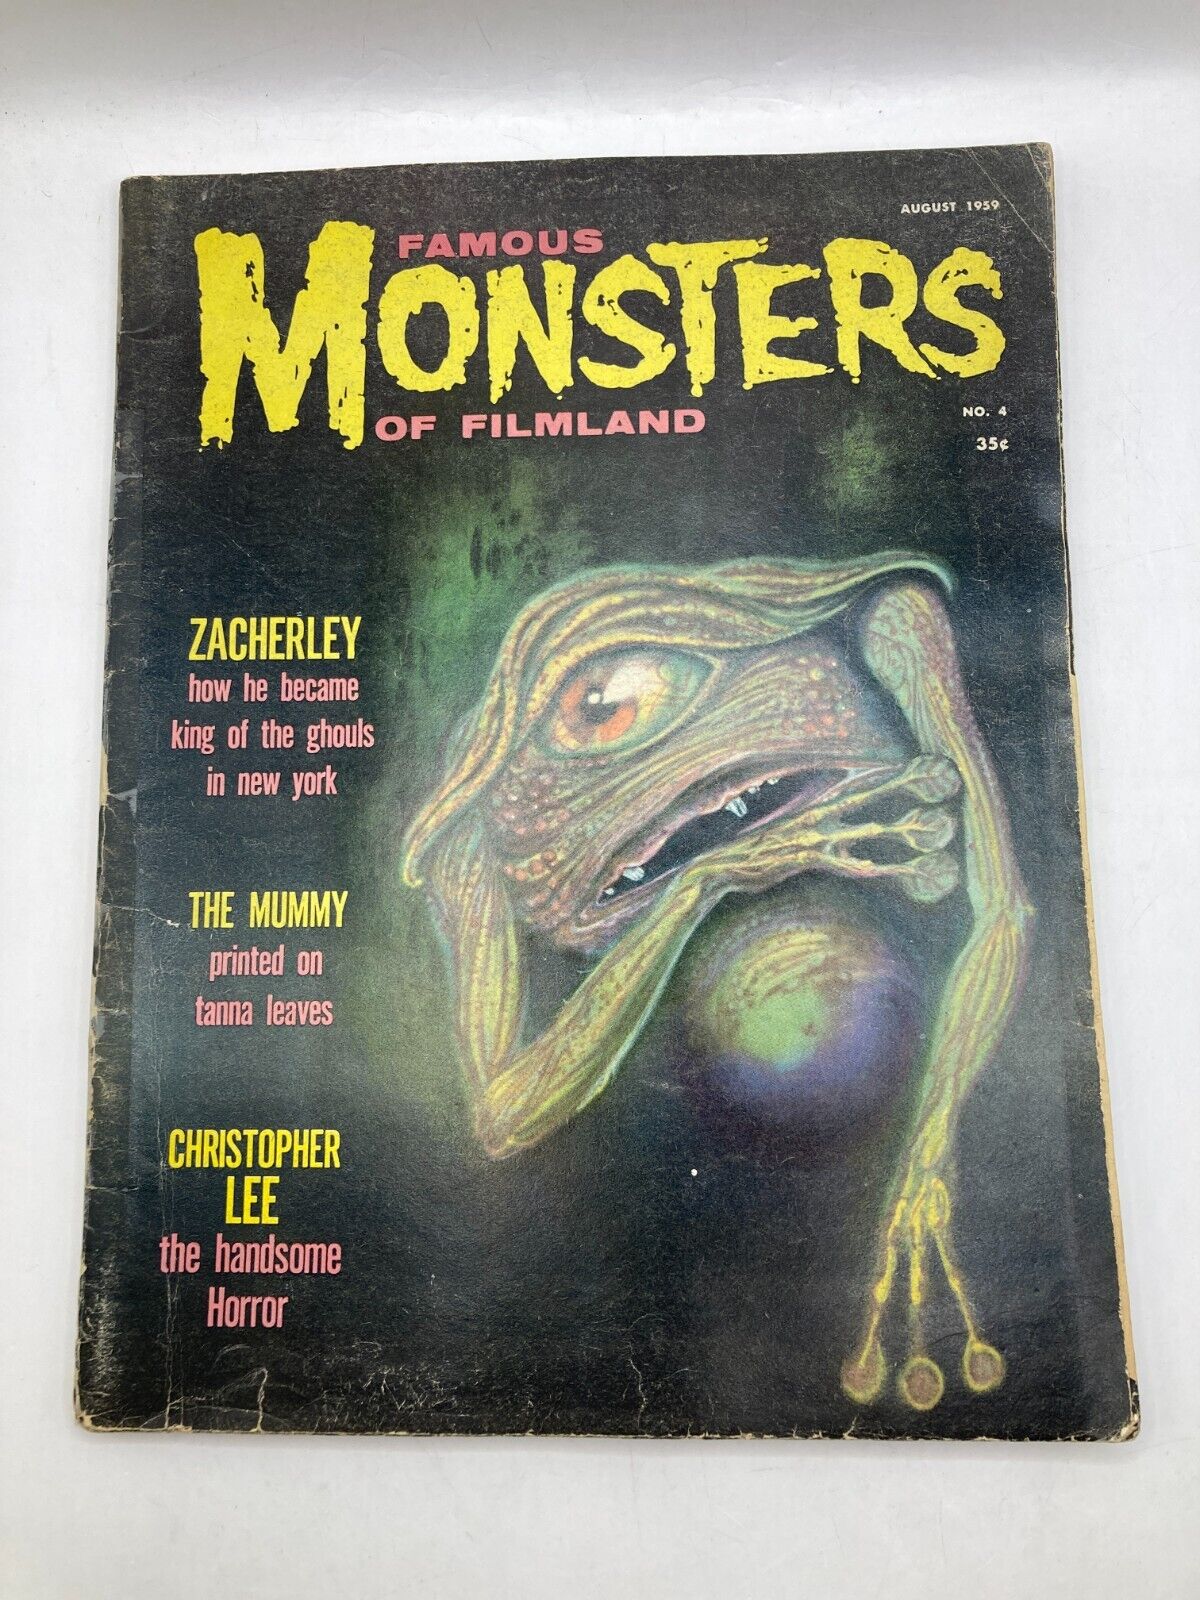 AUGUST 1959 FAMOUS MONSTERS OF FILMLAND #4